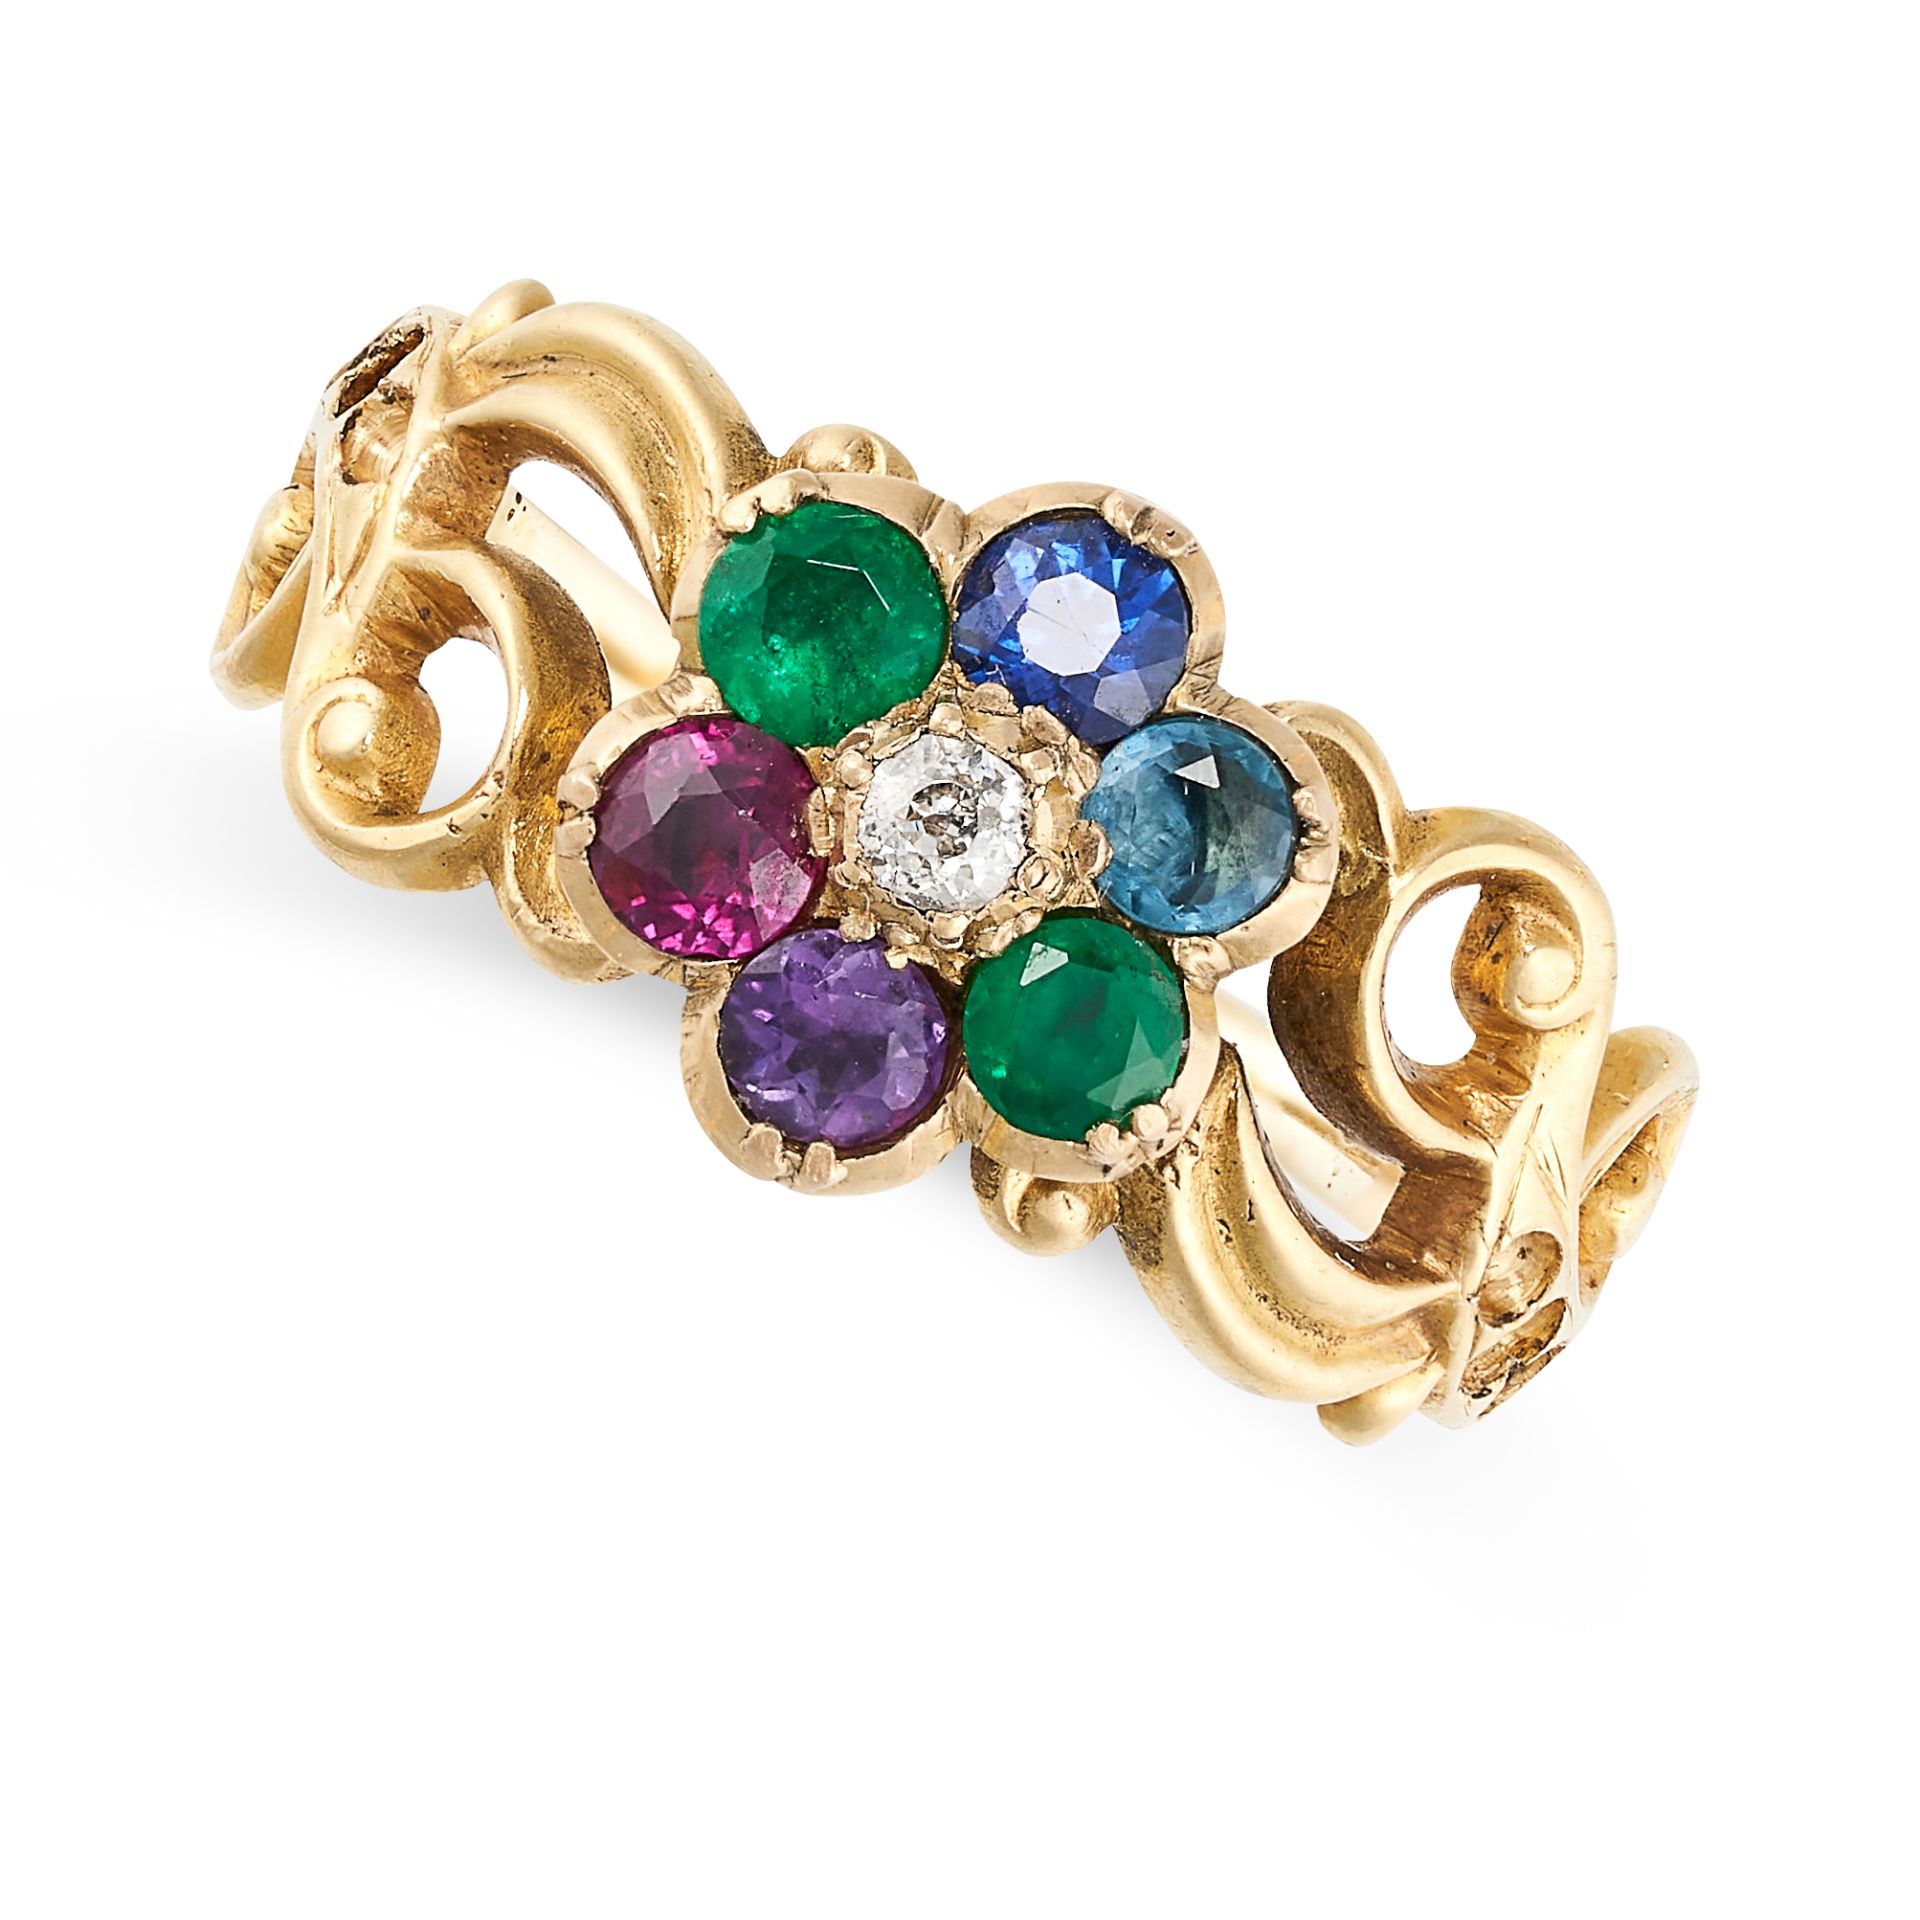 AN ANTIQUE GEMSET DEAREST RING in yellow gold, the first letter of the name of each stone spelling